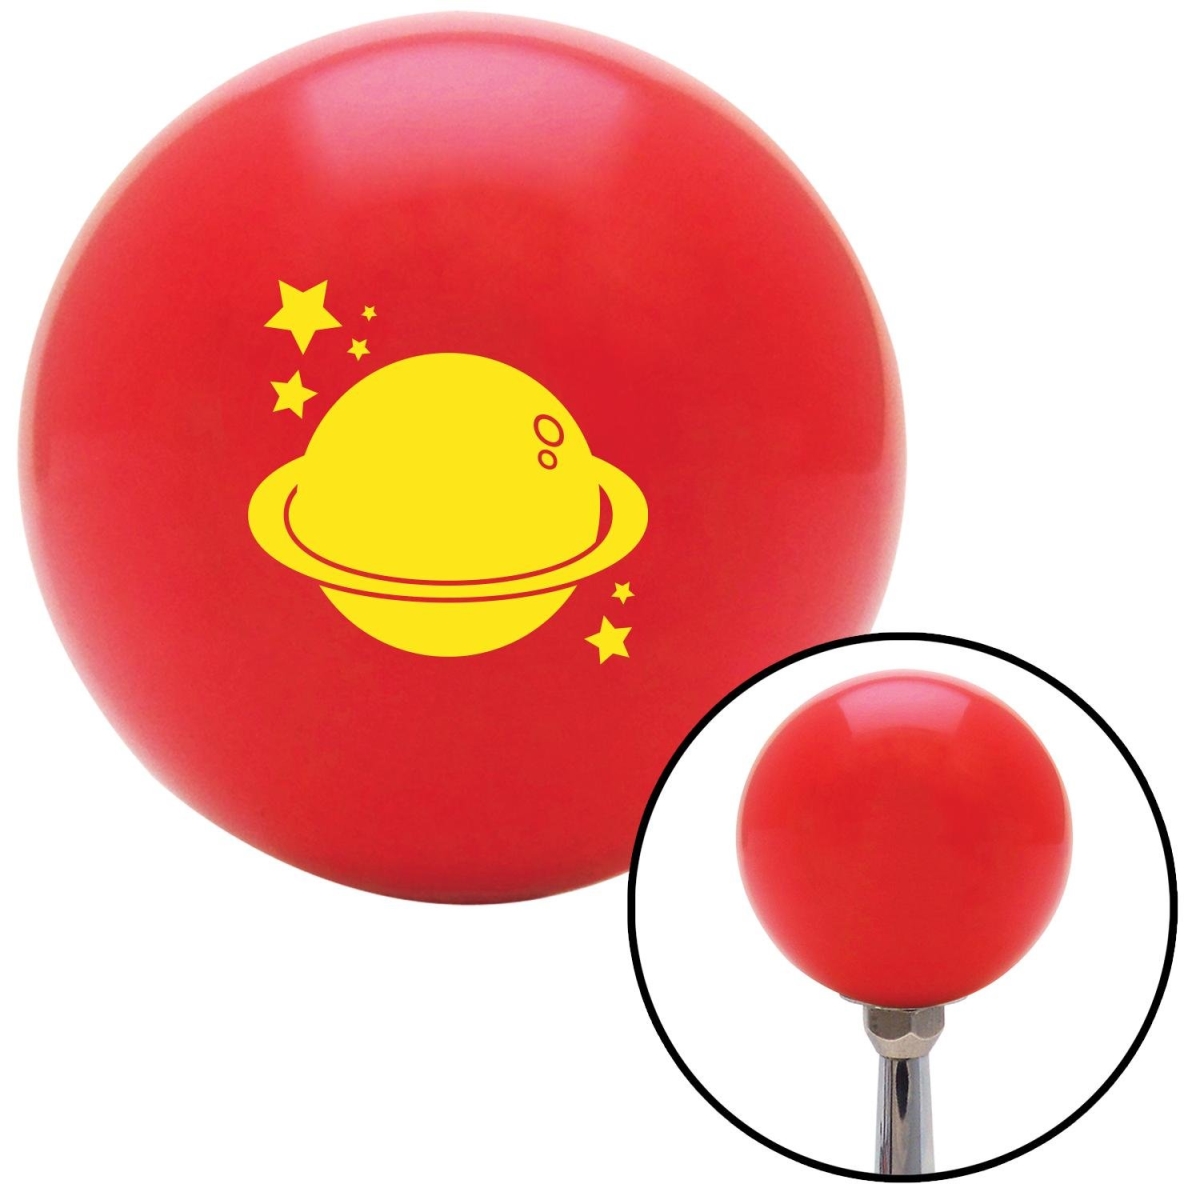 Picture of American Shifter 101393 Yellow Planet & Stars Red Shift Knob with M16 x 1.5 Insert Shifter Auto Manual Brody